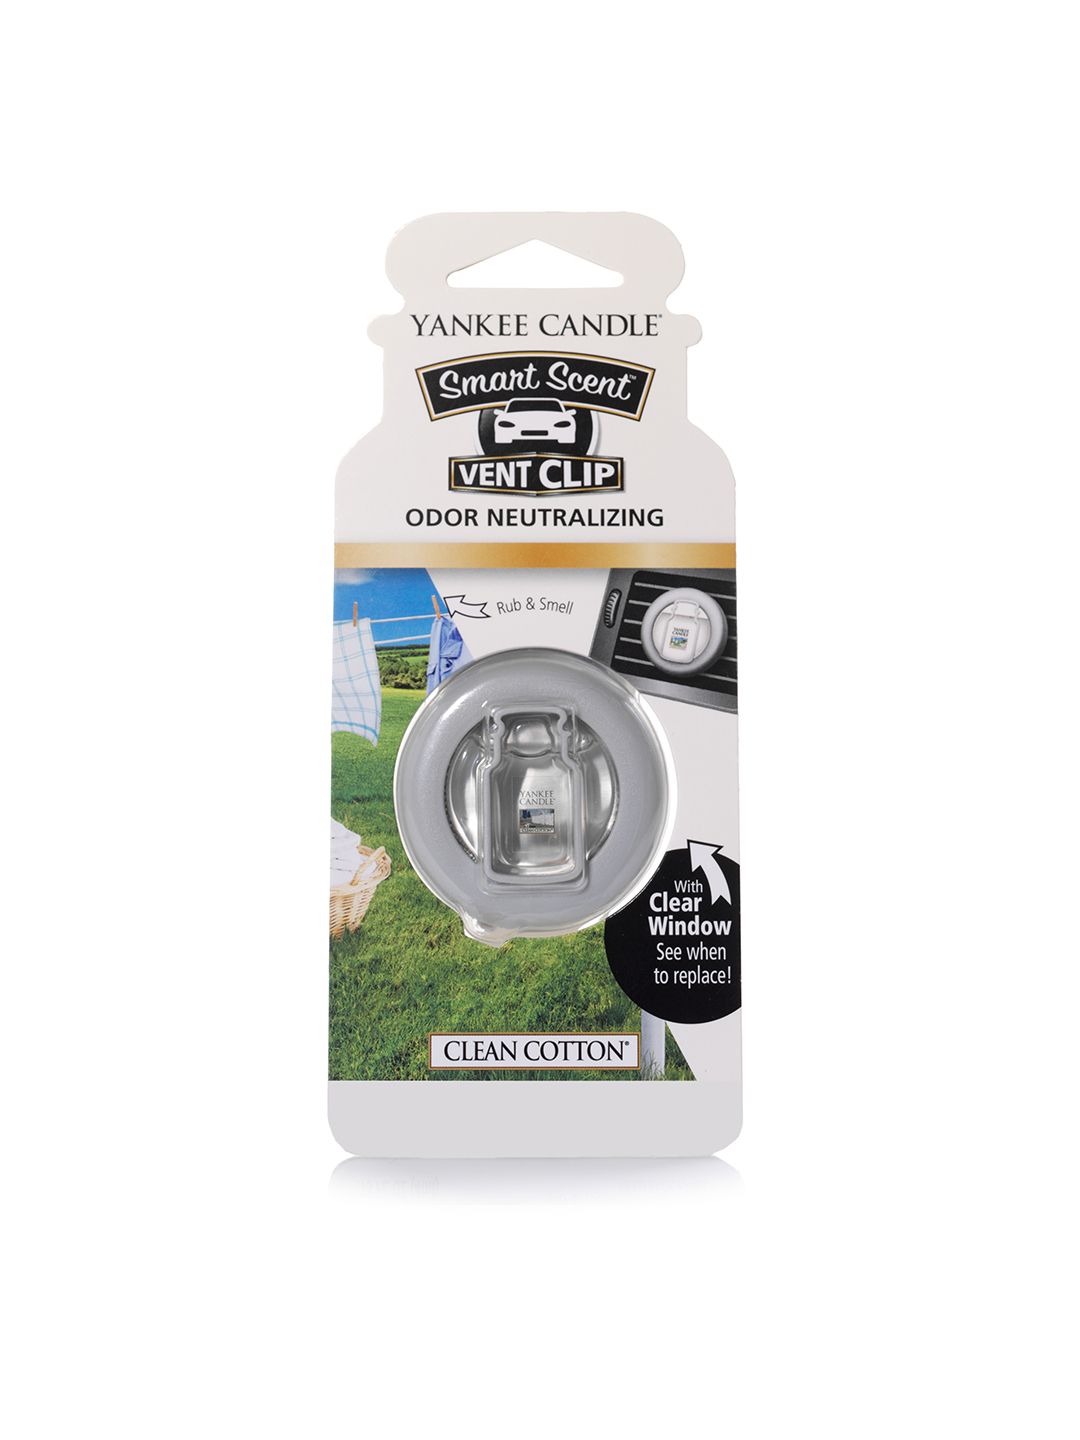 YANKEE CANDLE White Clean Cotton Smart Scent Vent Clip Air Freshener Price in India